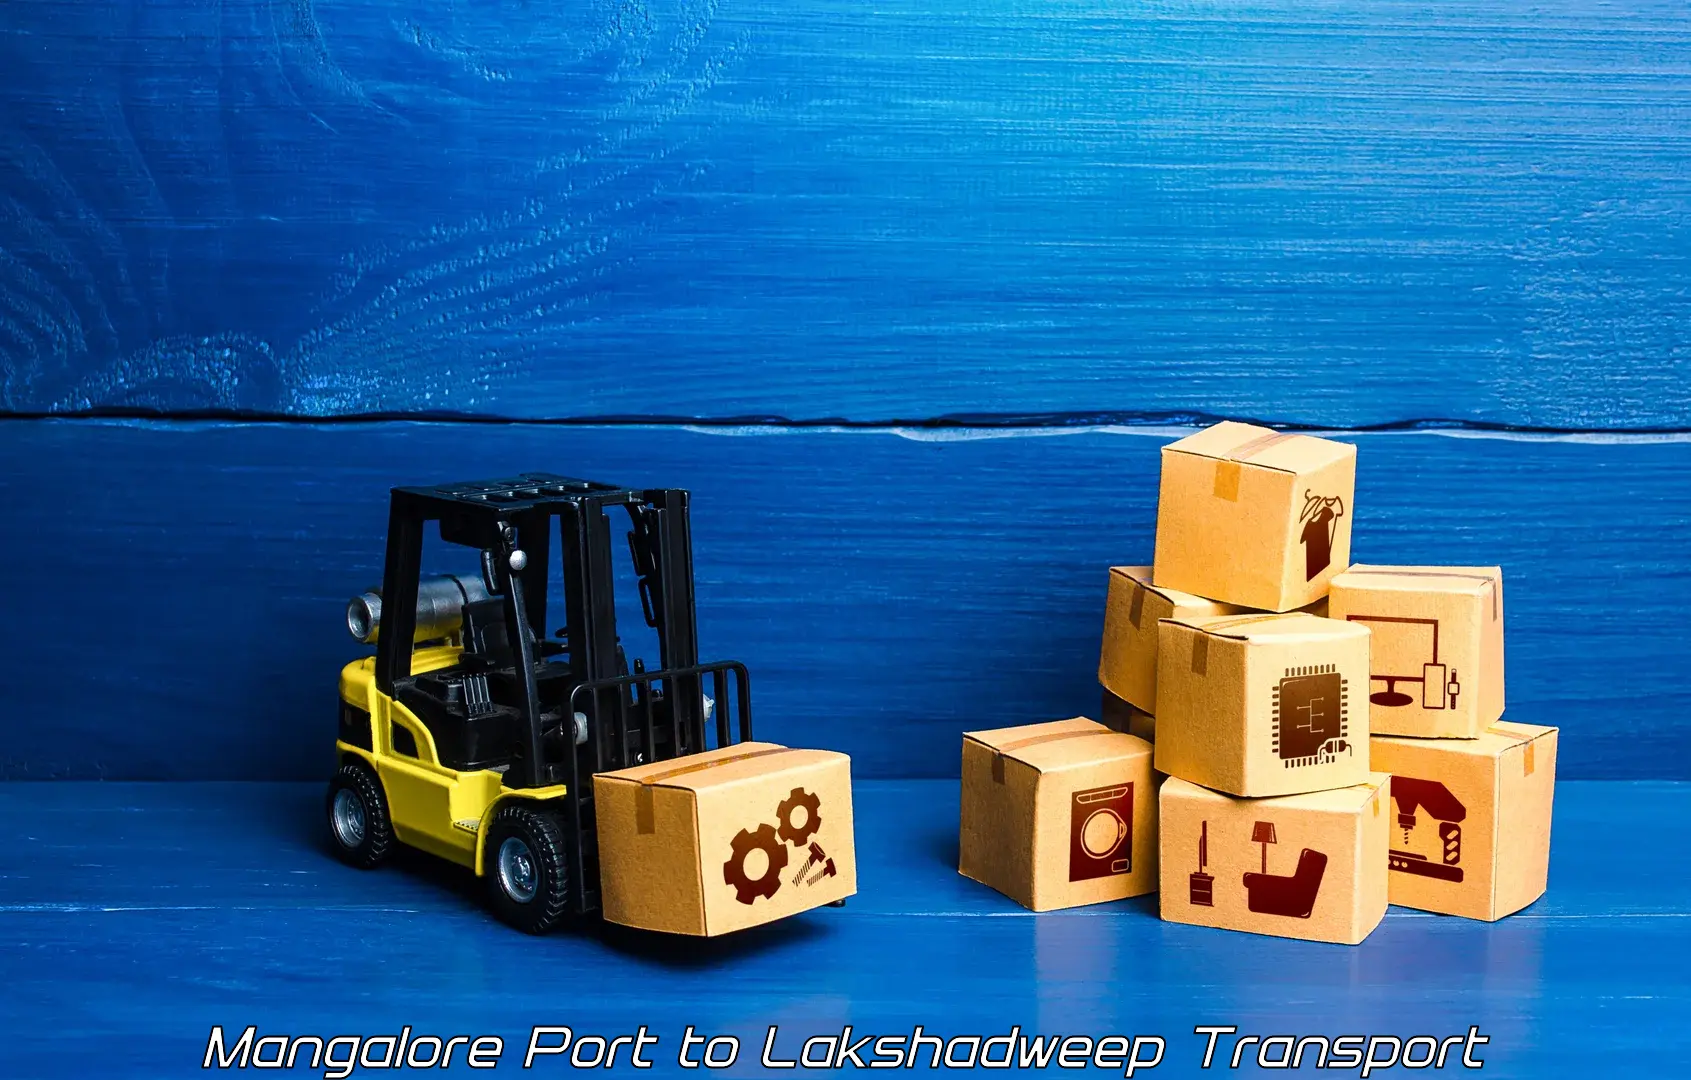 Part load transport service in India Mangalore Port to Lakshadweep